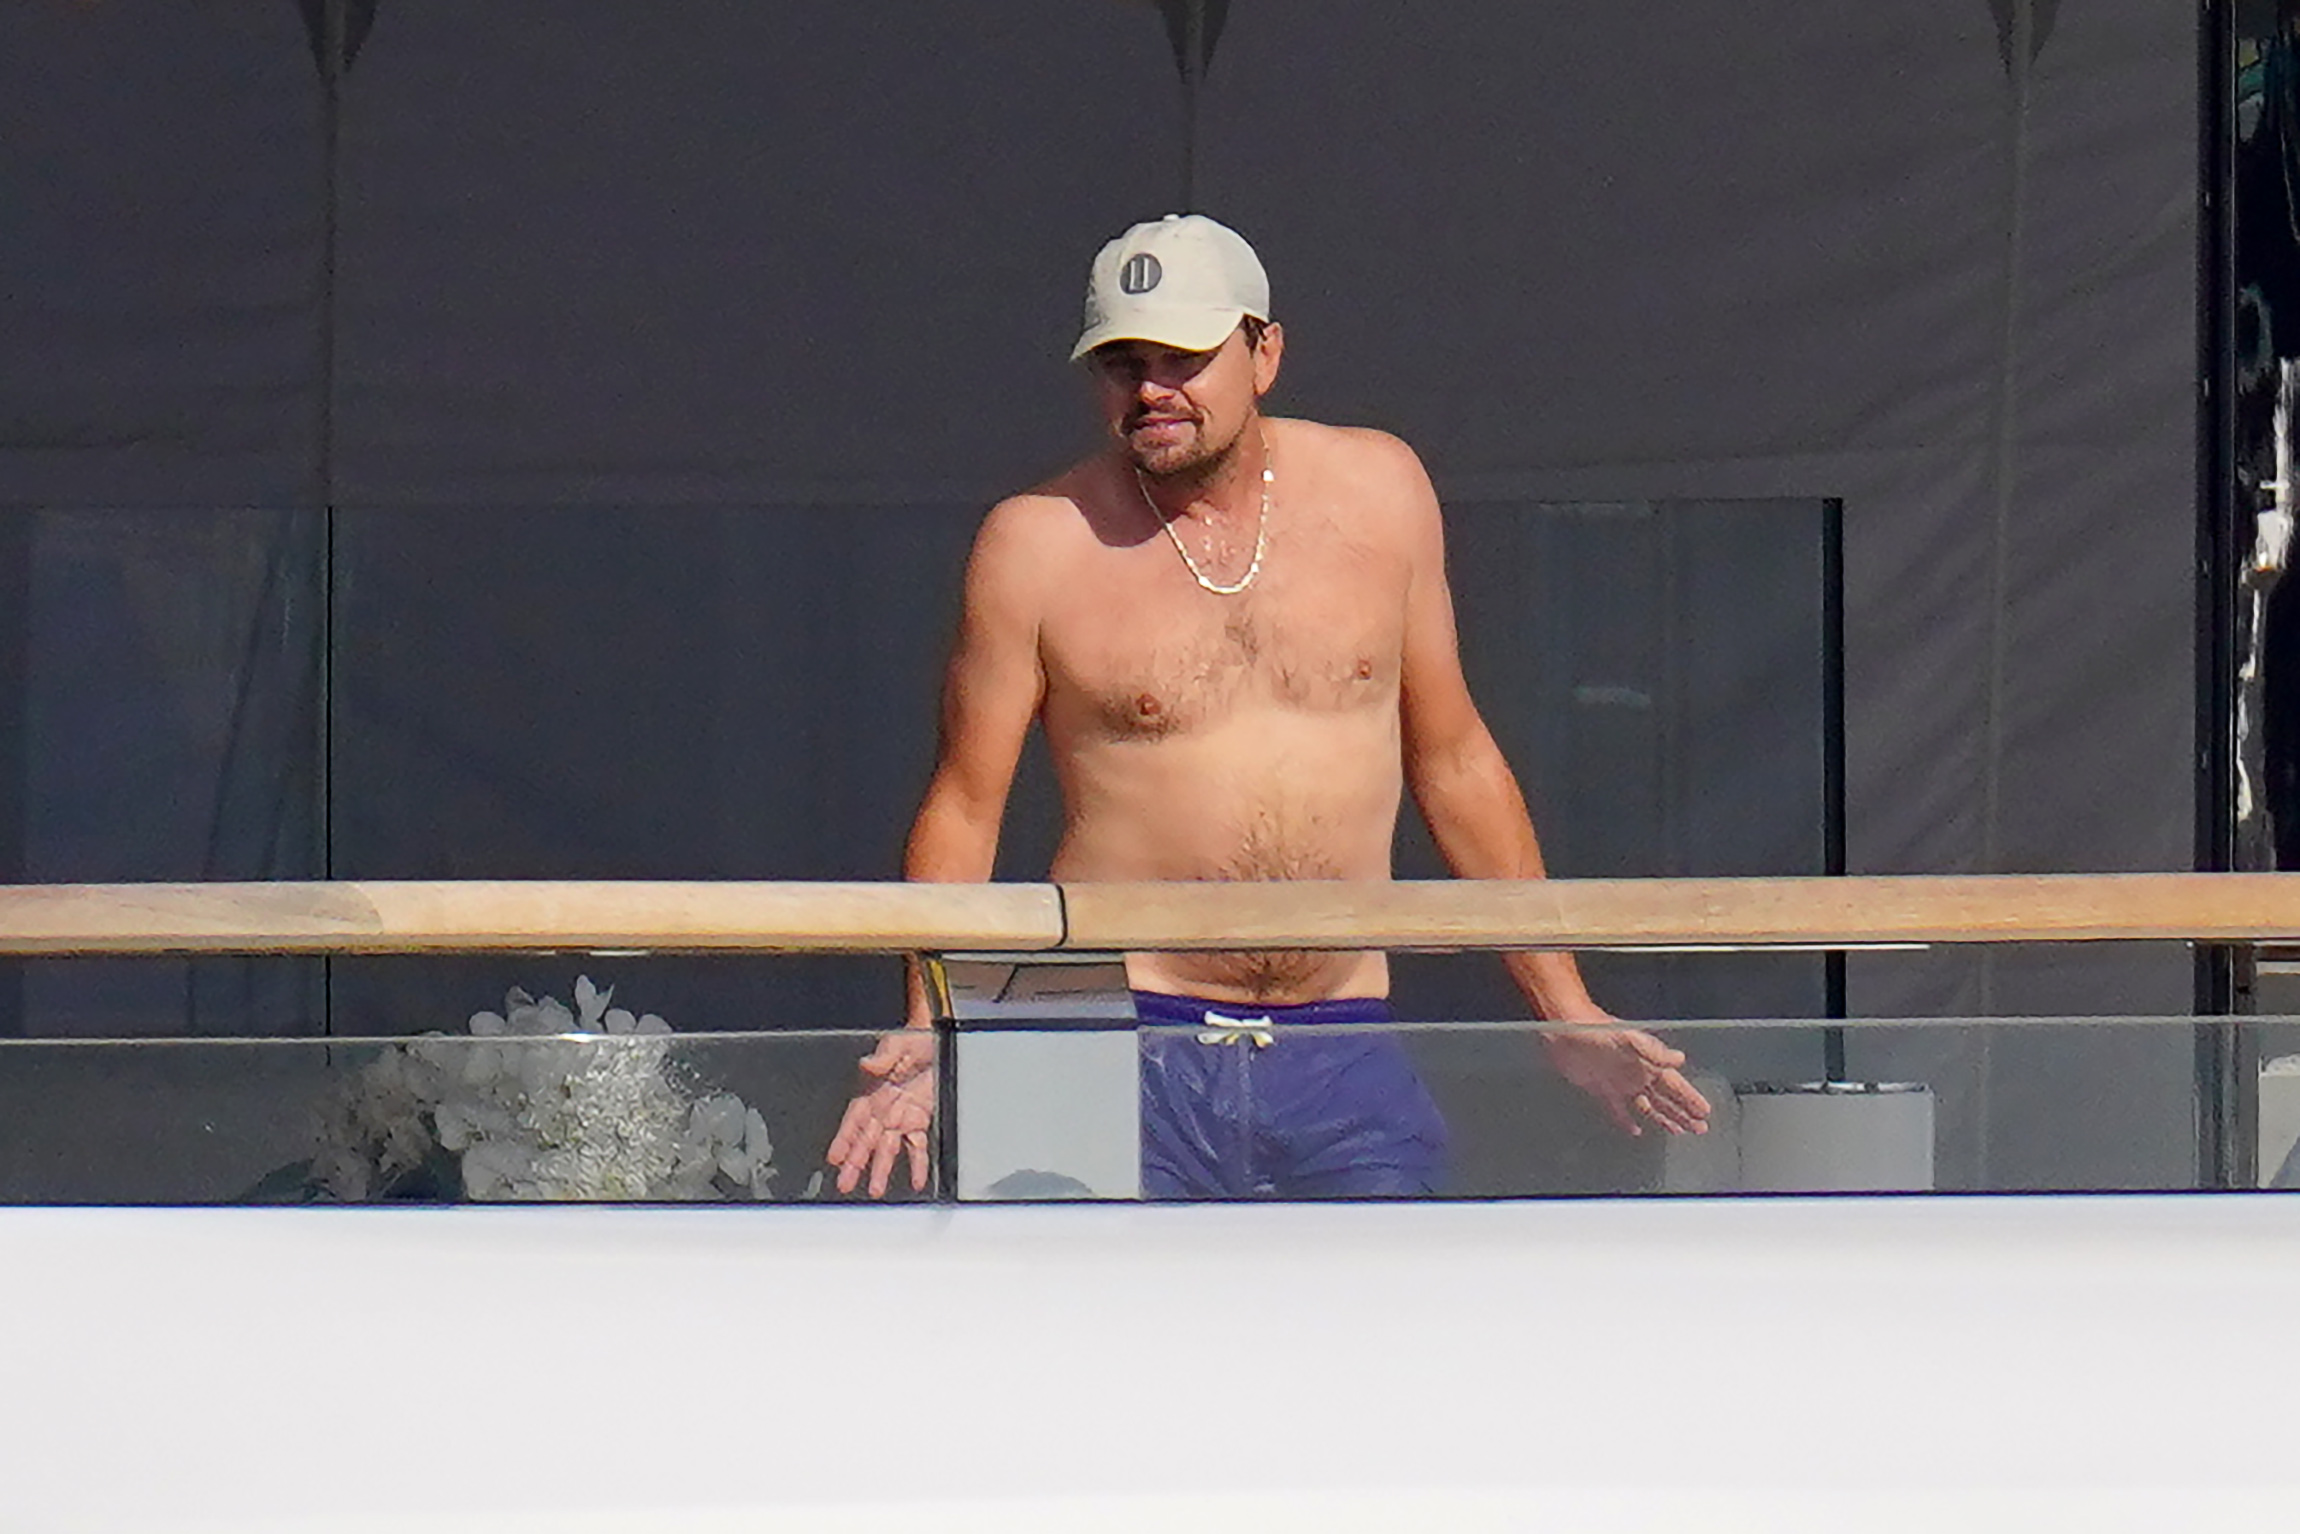 Holidays.  Leonardo DiCaprio enjoyed a day on a luxurious yacht in Antibes, France.  During the walk, the actor sunbathed, cooled off in the water and also shared a meal with his friend Philip Green